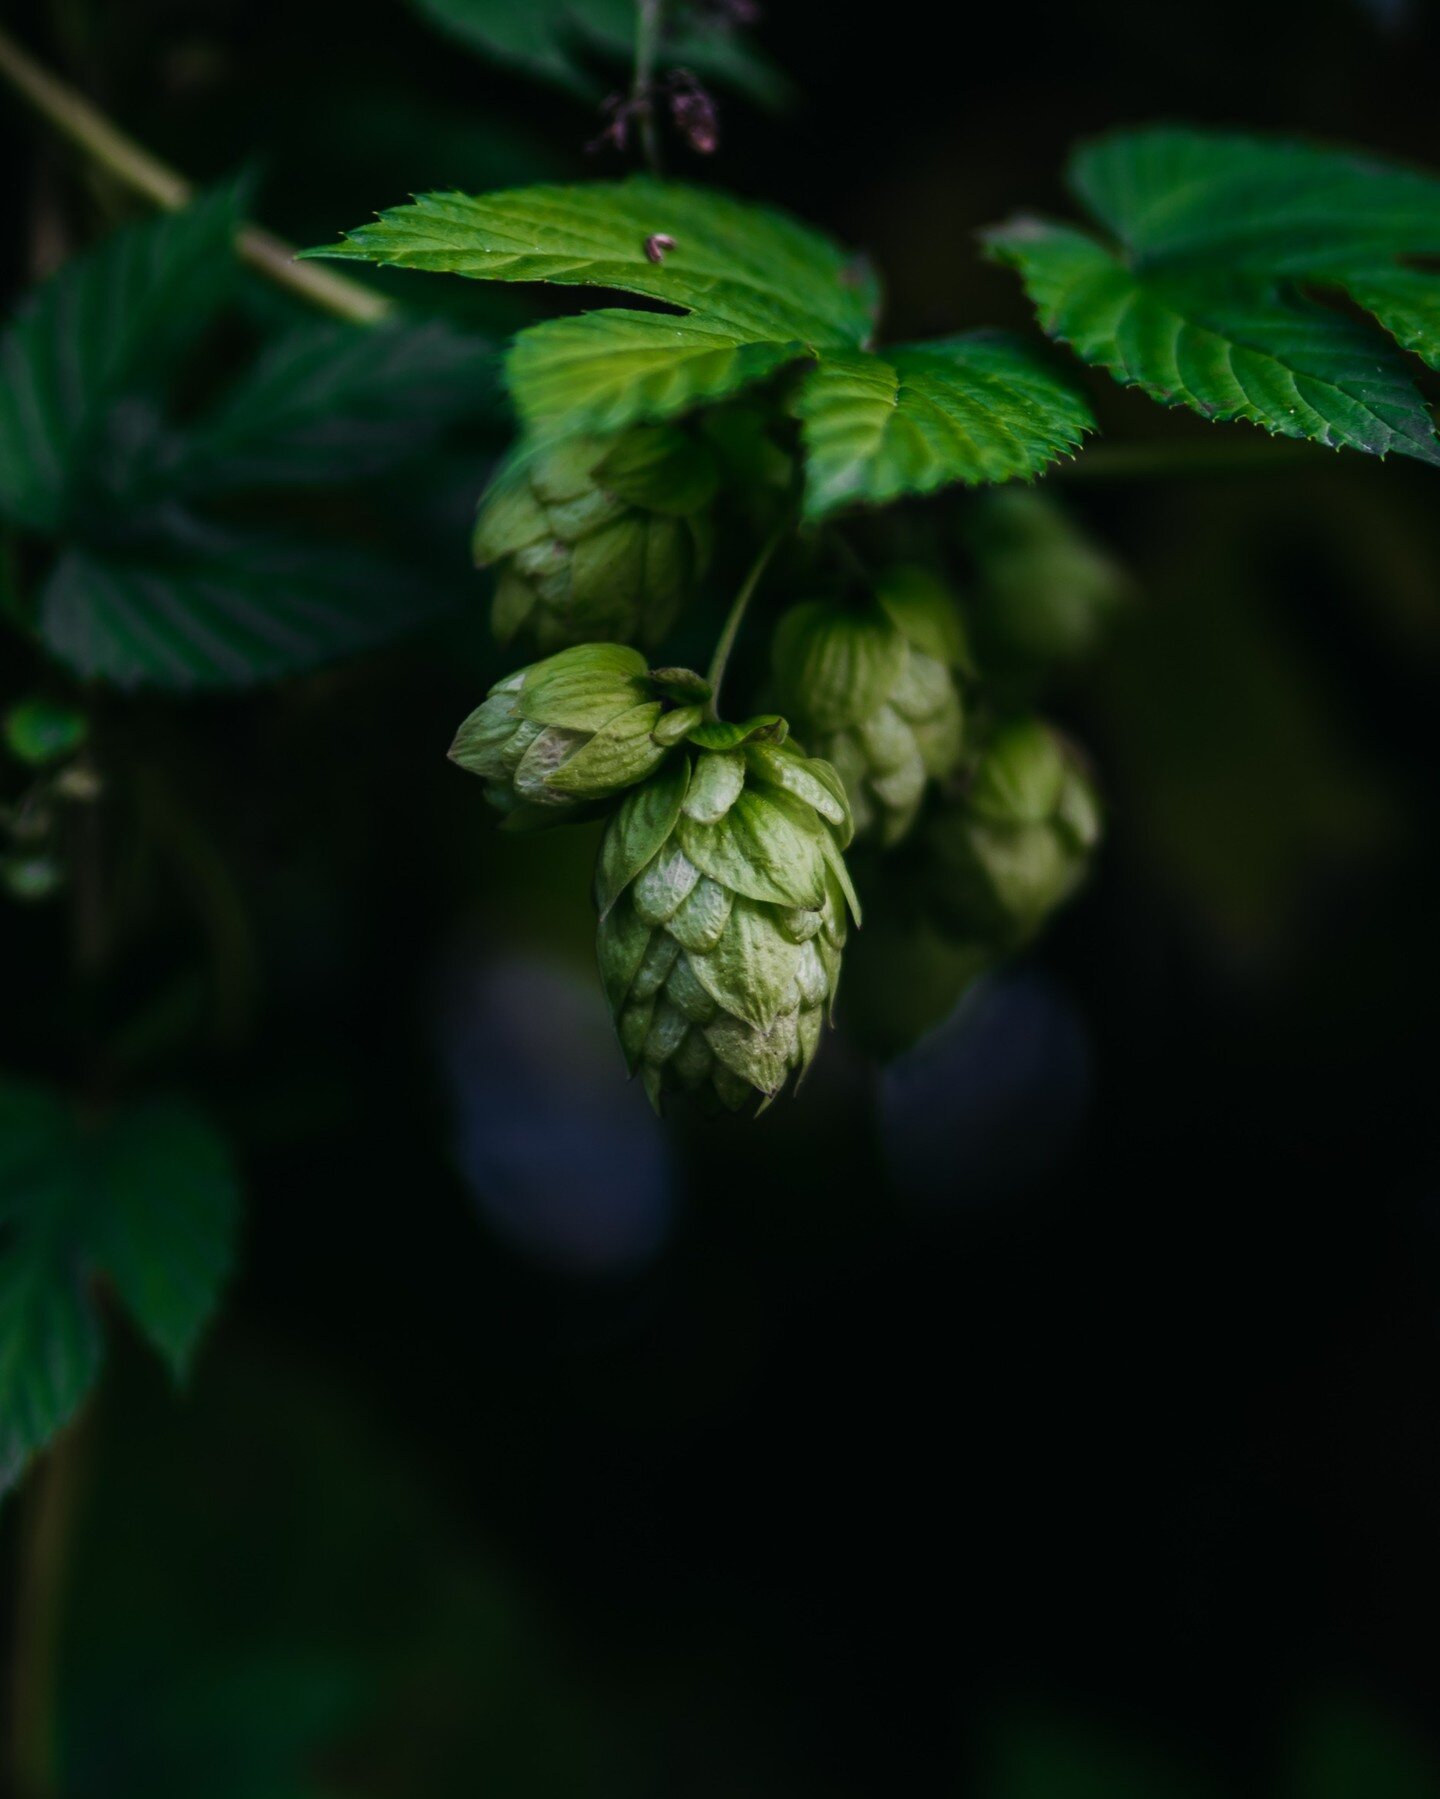 Wild hops in the streets